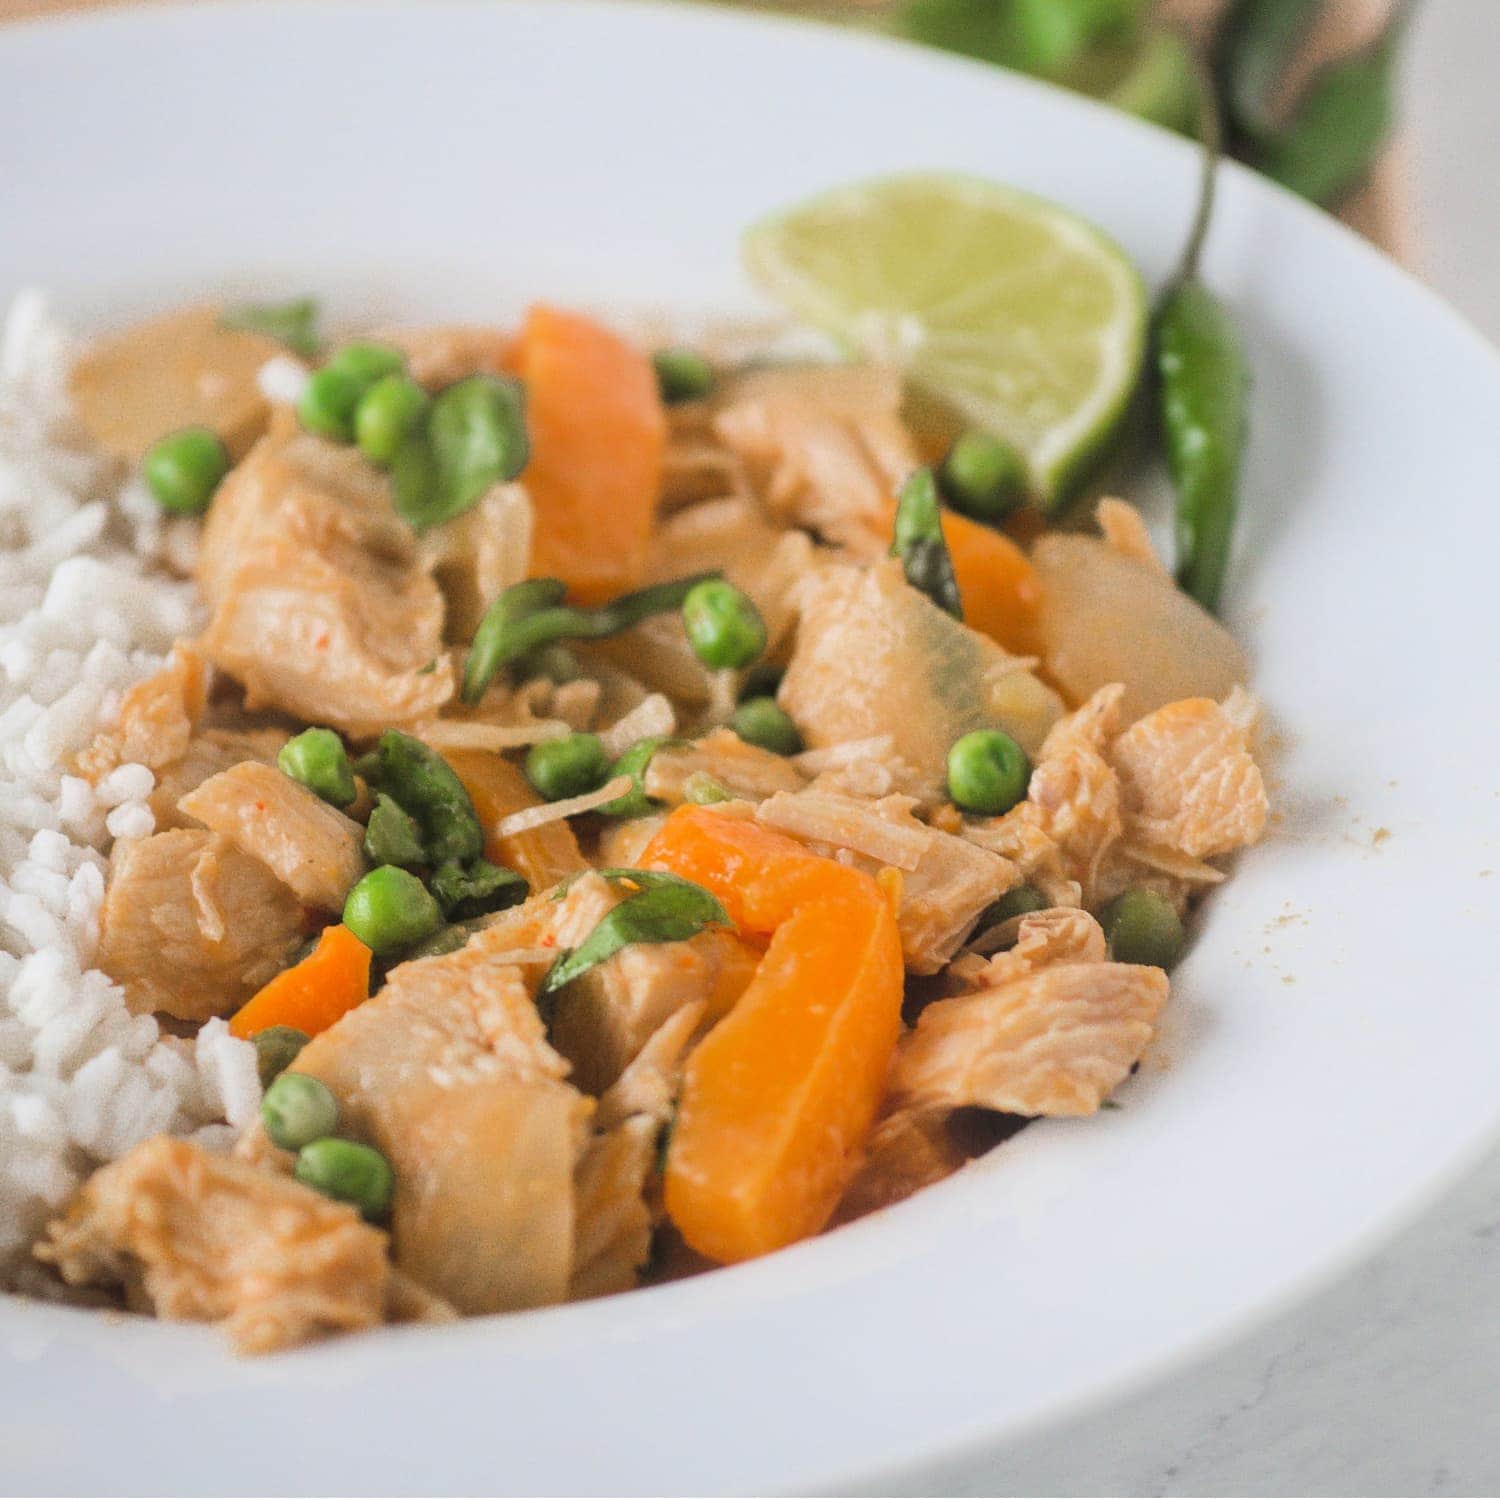 Thai Curred Chicken - an easy dish ready in less than 30 minutes